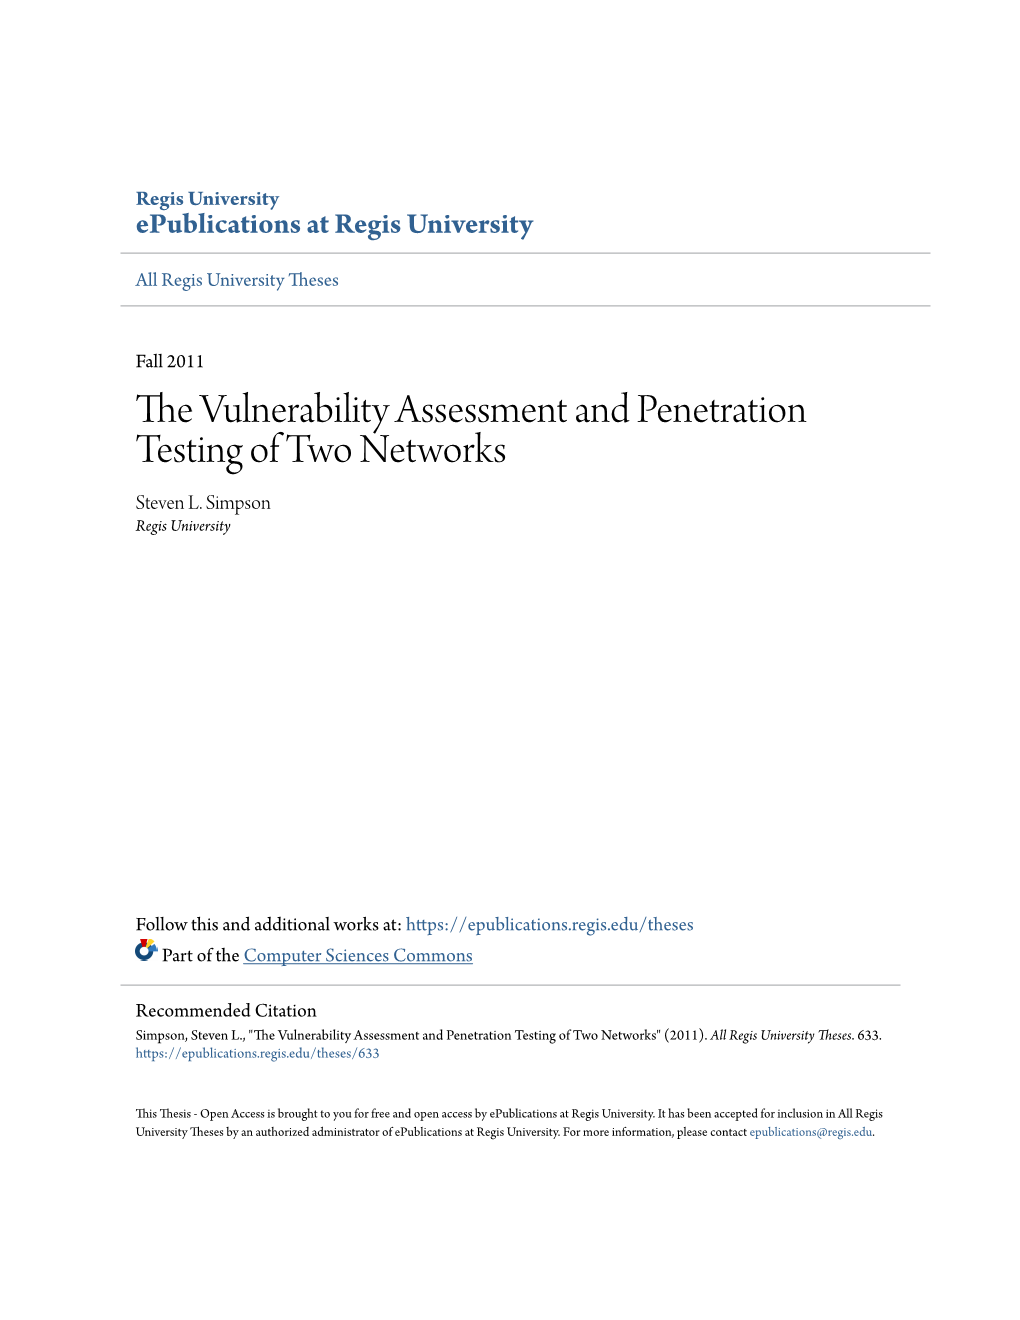 The Vulnerability Assessment and Penetration Testing of Two Networks